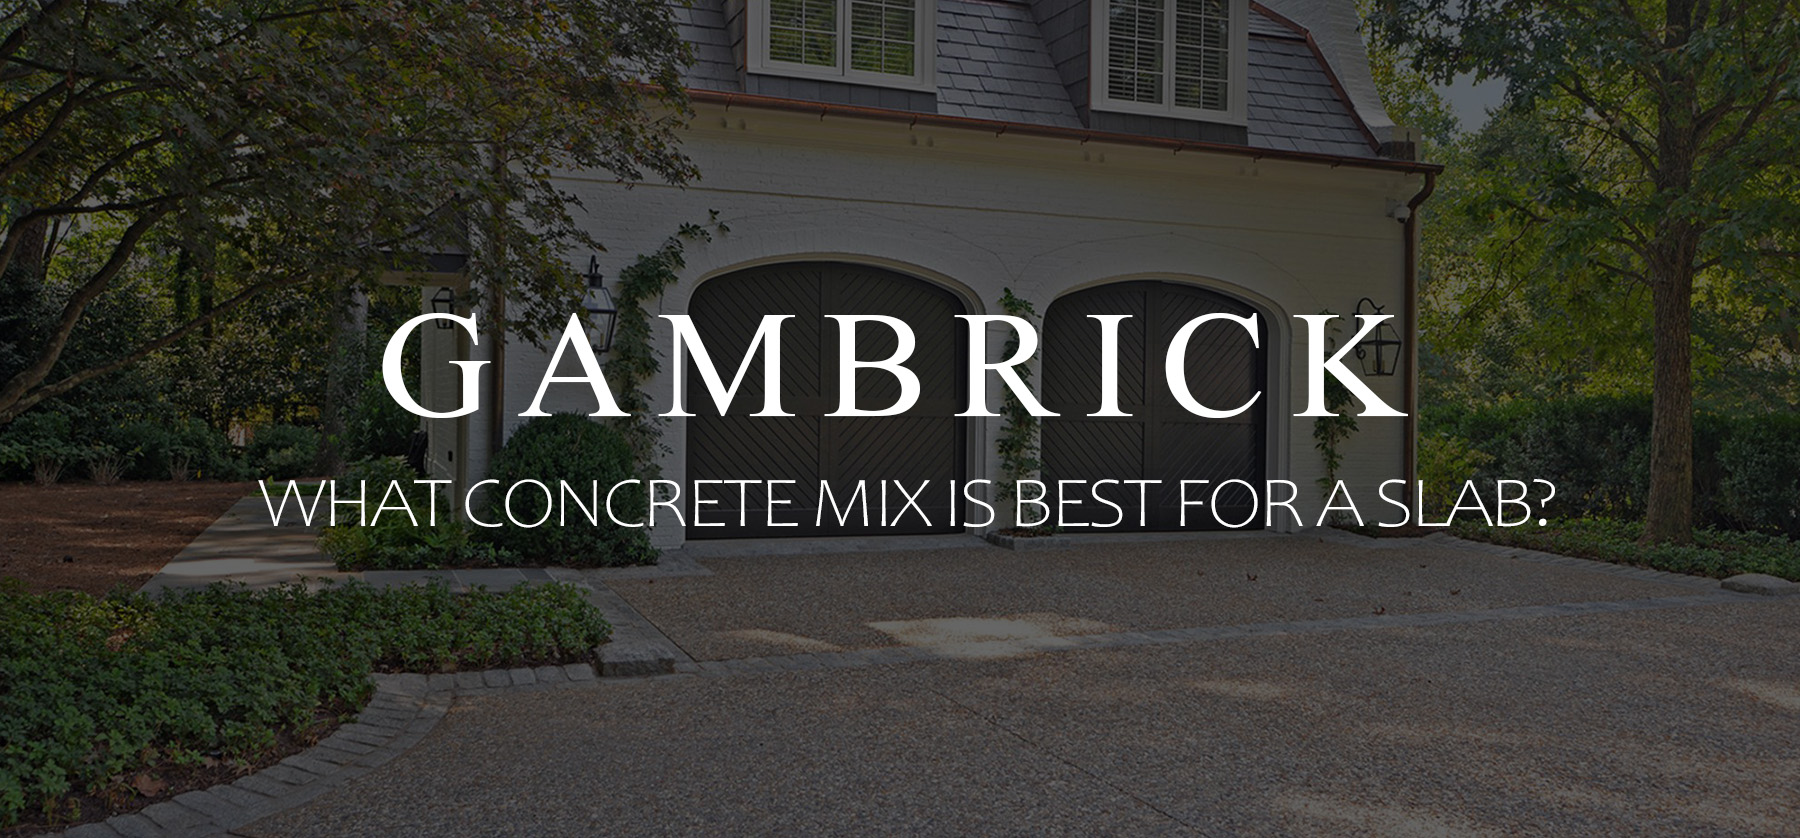 what concrete mix is best for a slab banner